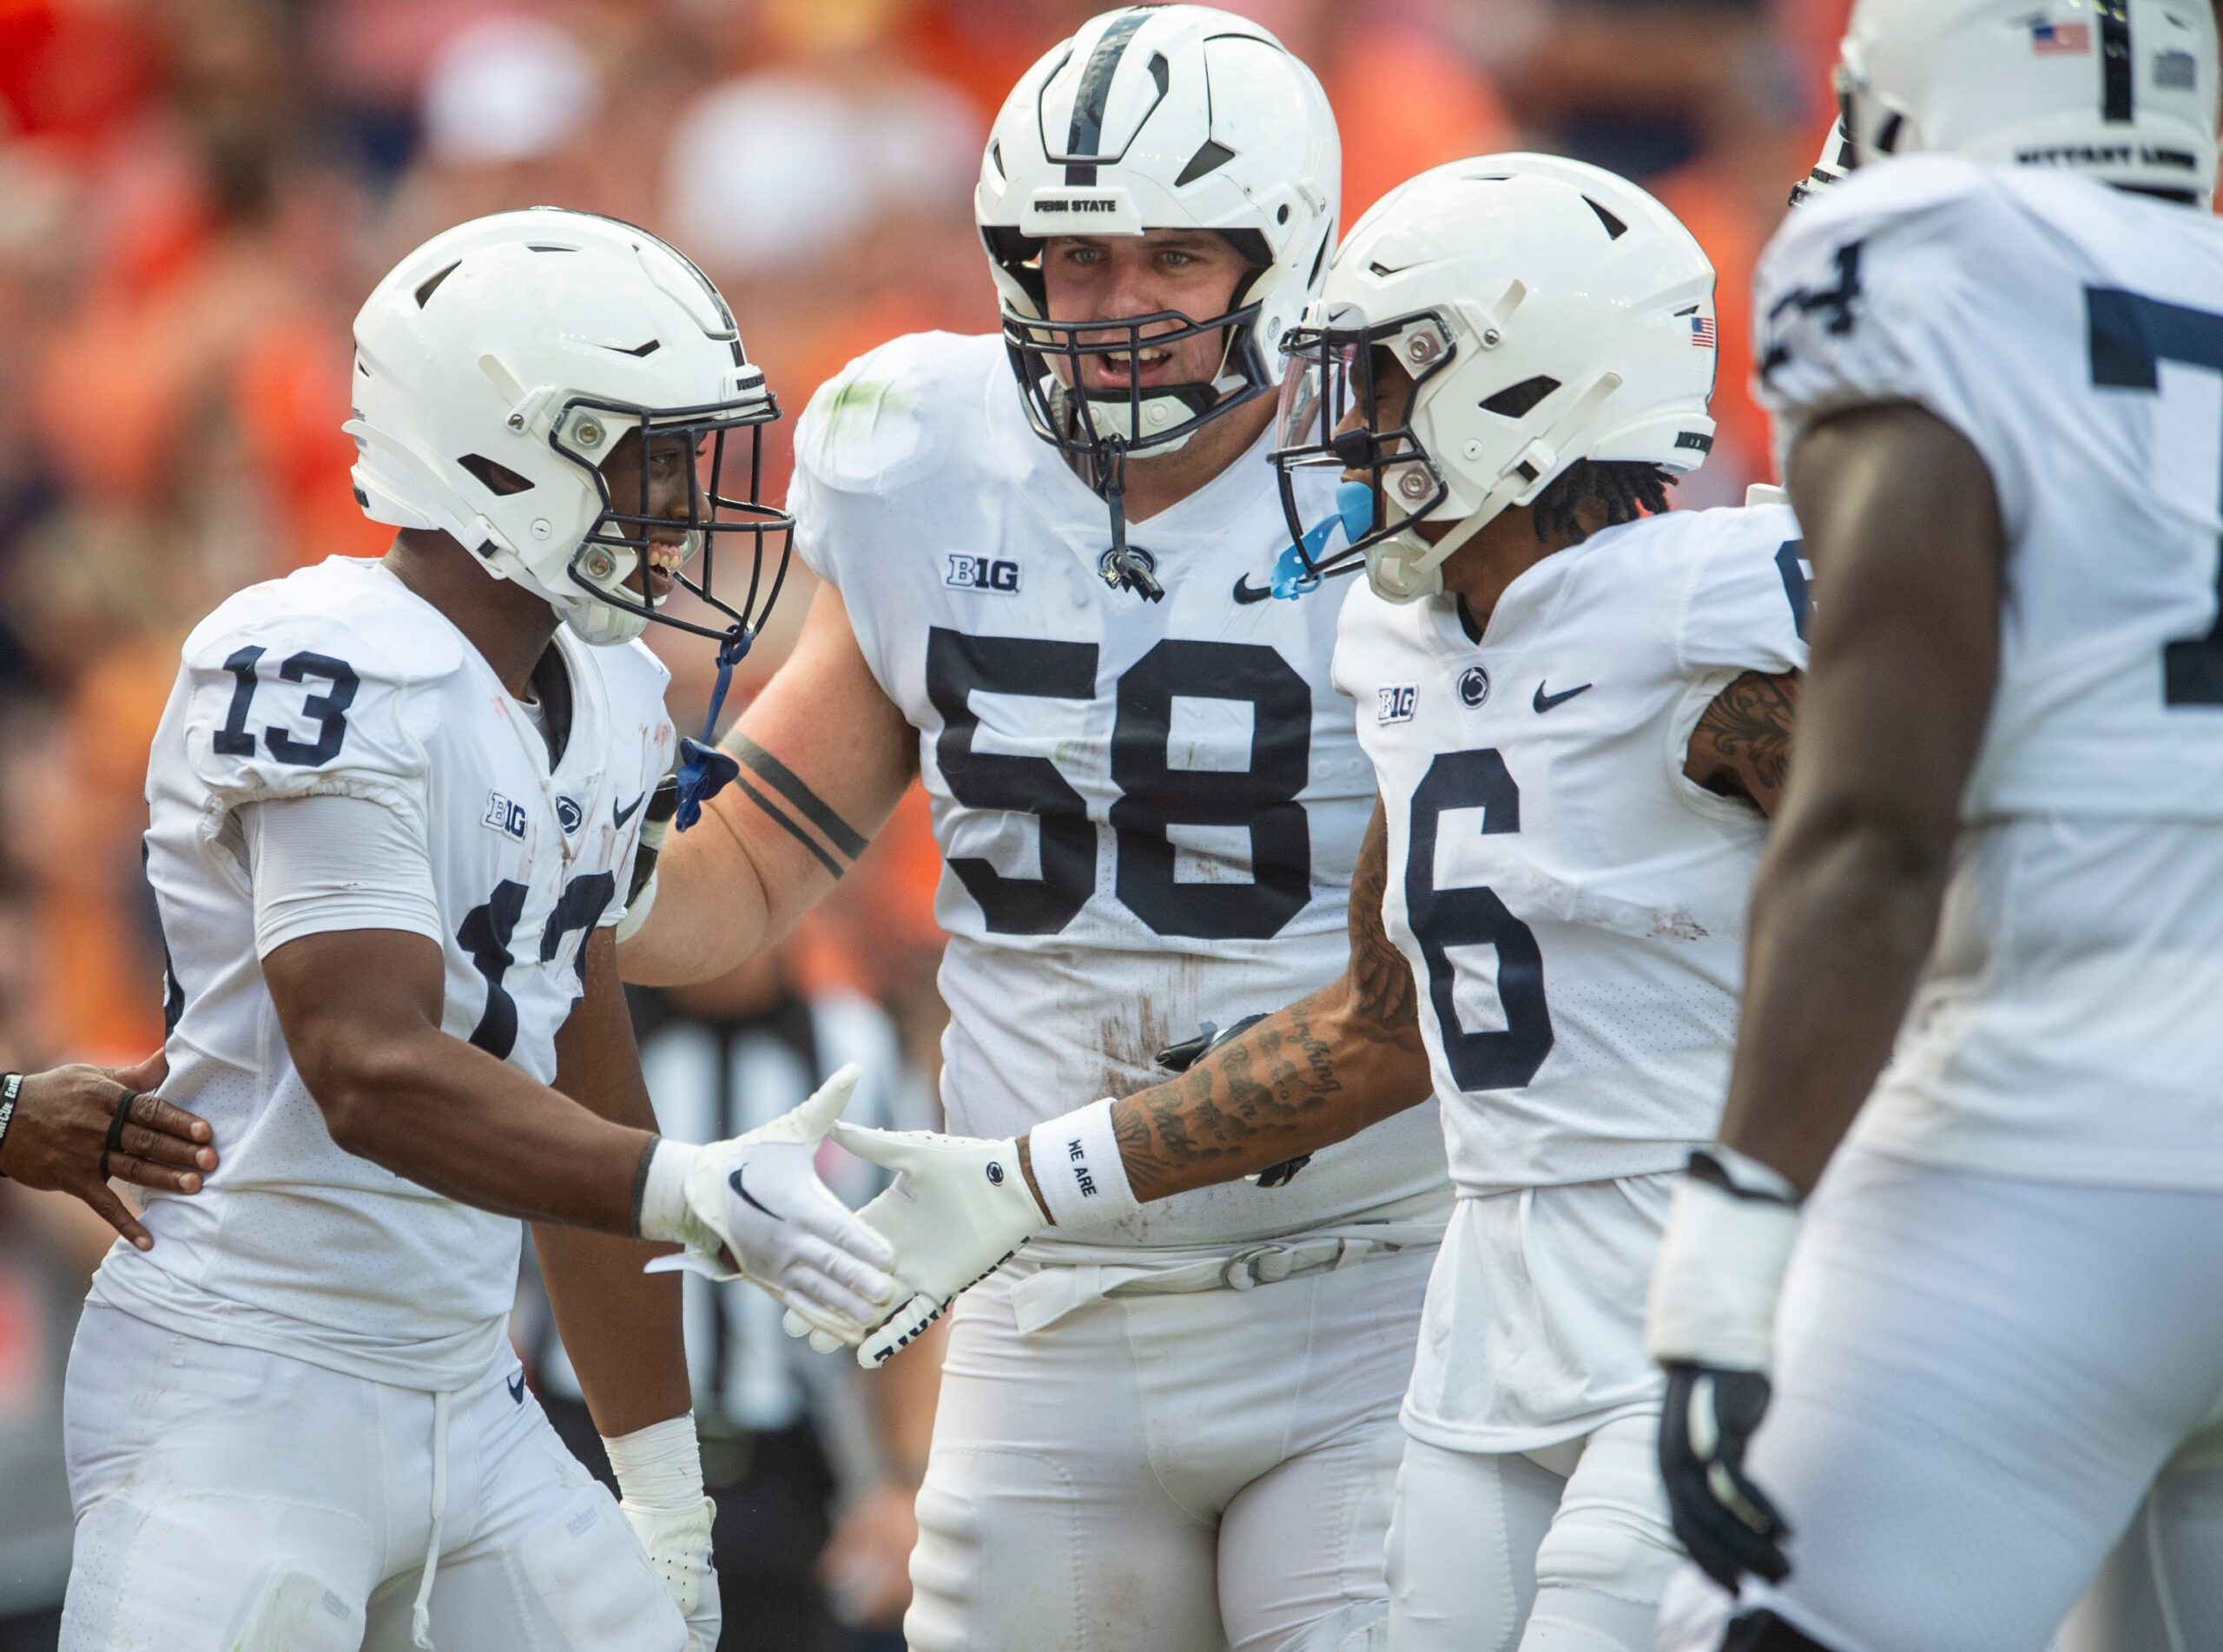 2023 Penn State football schedule, Penn State football, Big Ten conference